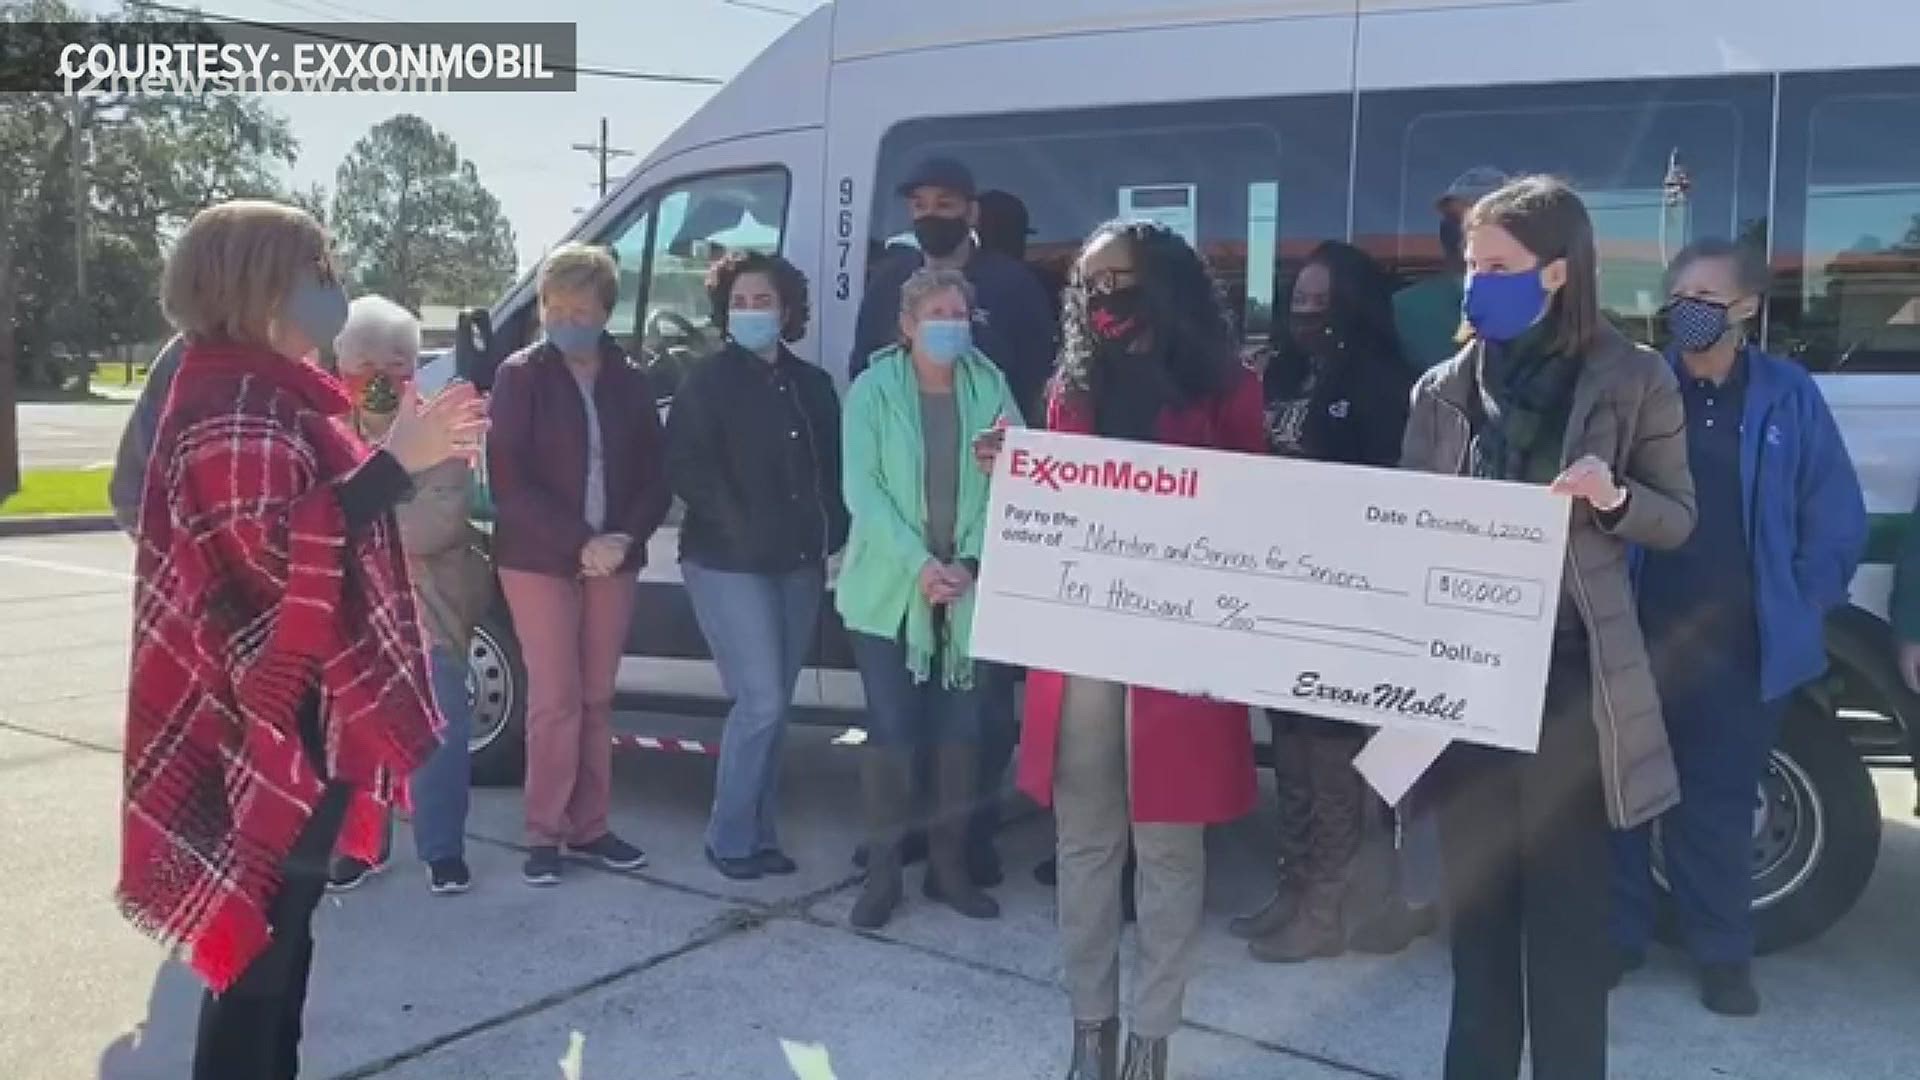 This Giving Tuesday, several deserving organizations got a hand up from ExxonMobil